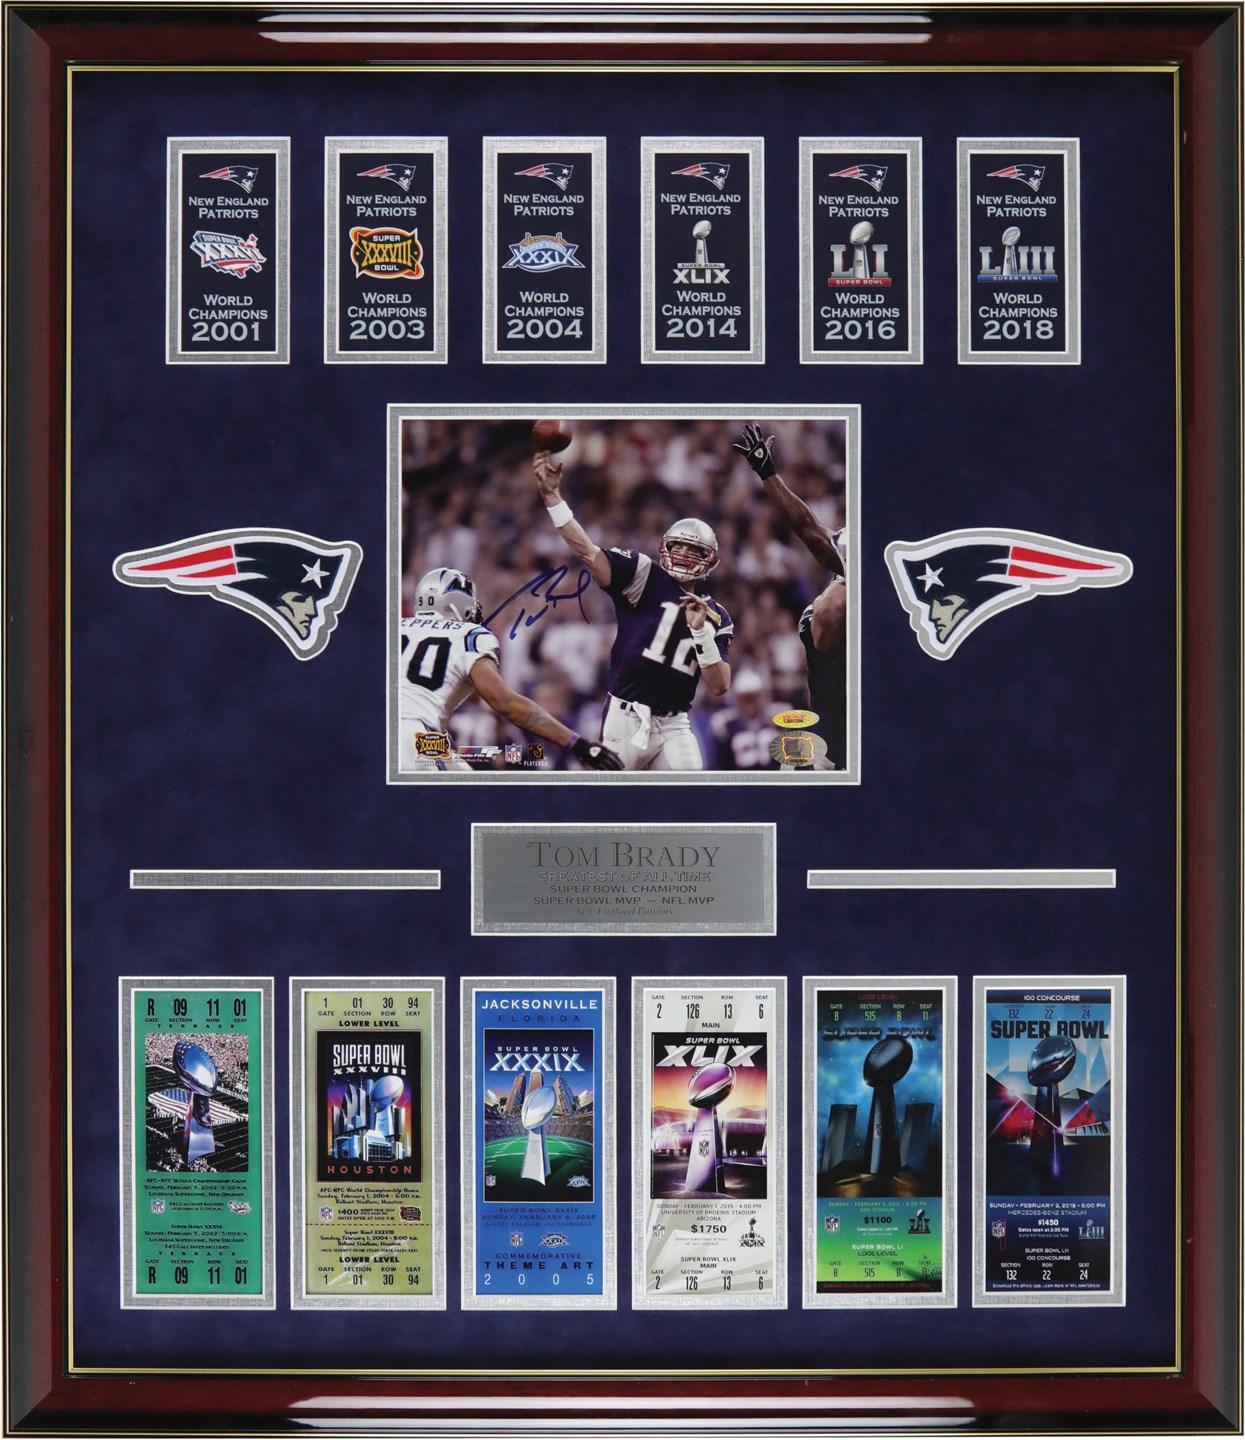 - Tom Brady Signed Photograph with Super Bowl Tickets Display (TriStar)